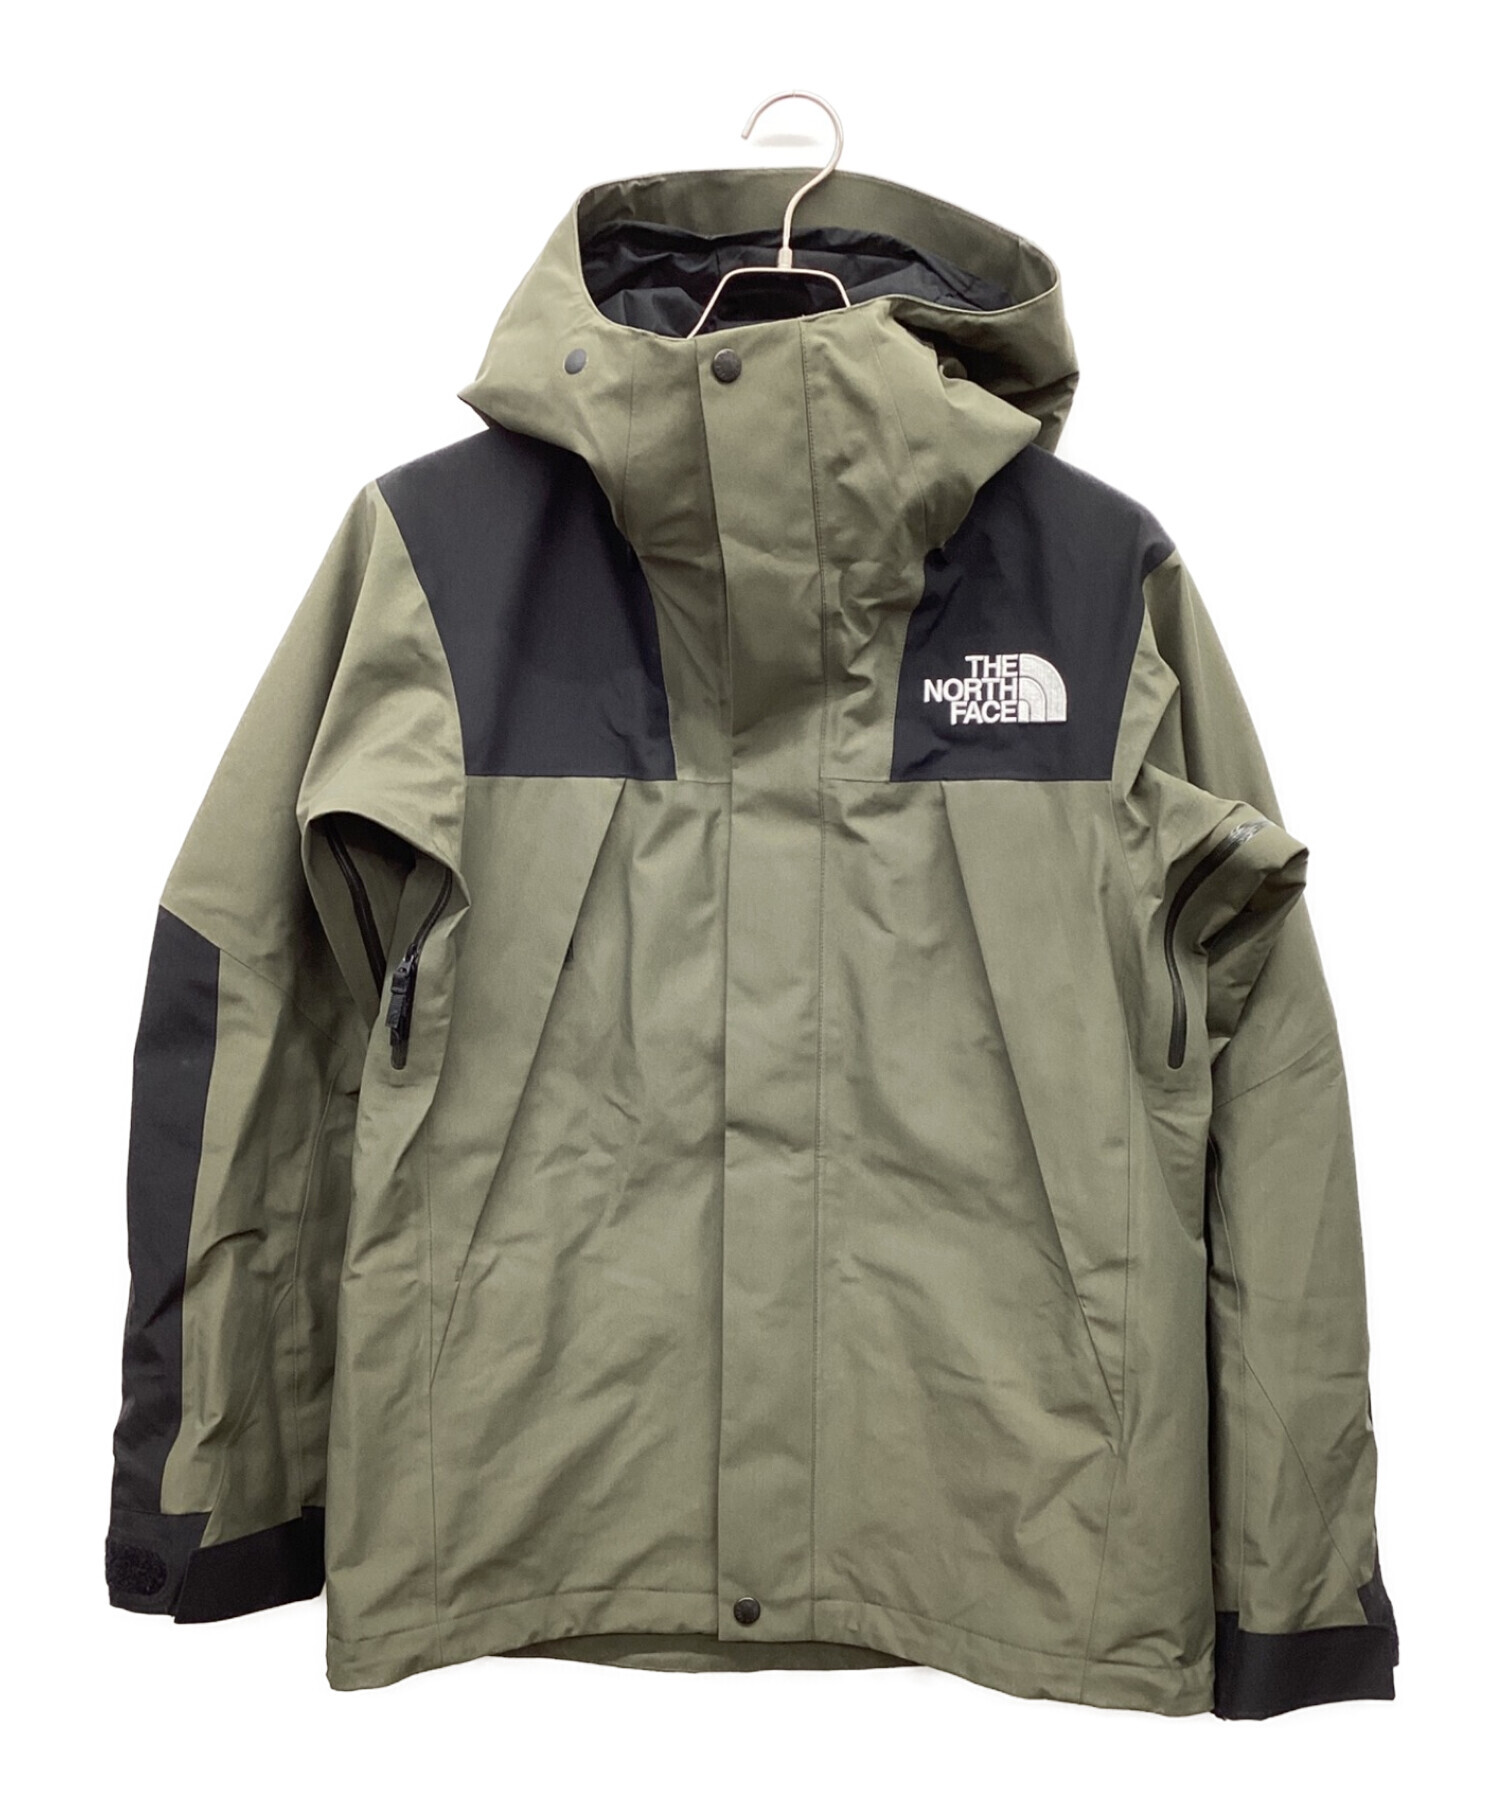 The north face mountain jacket Sサイズ